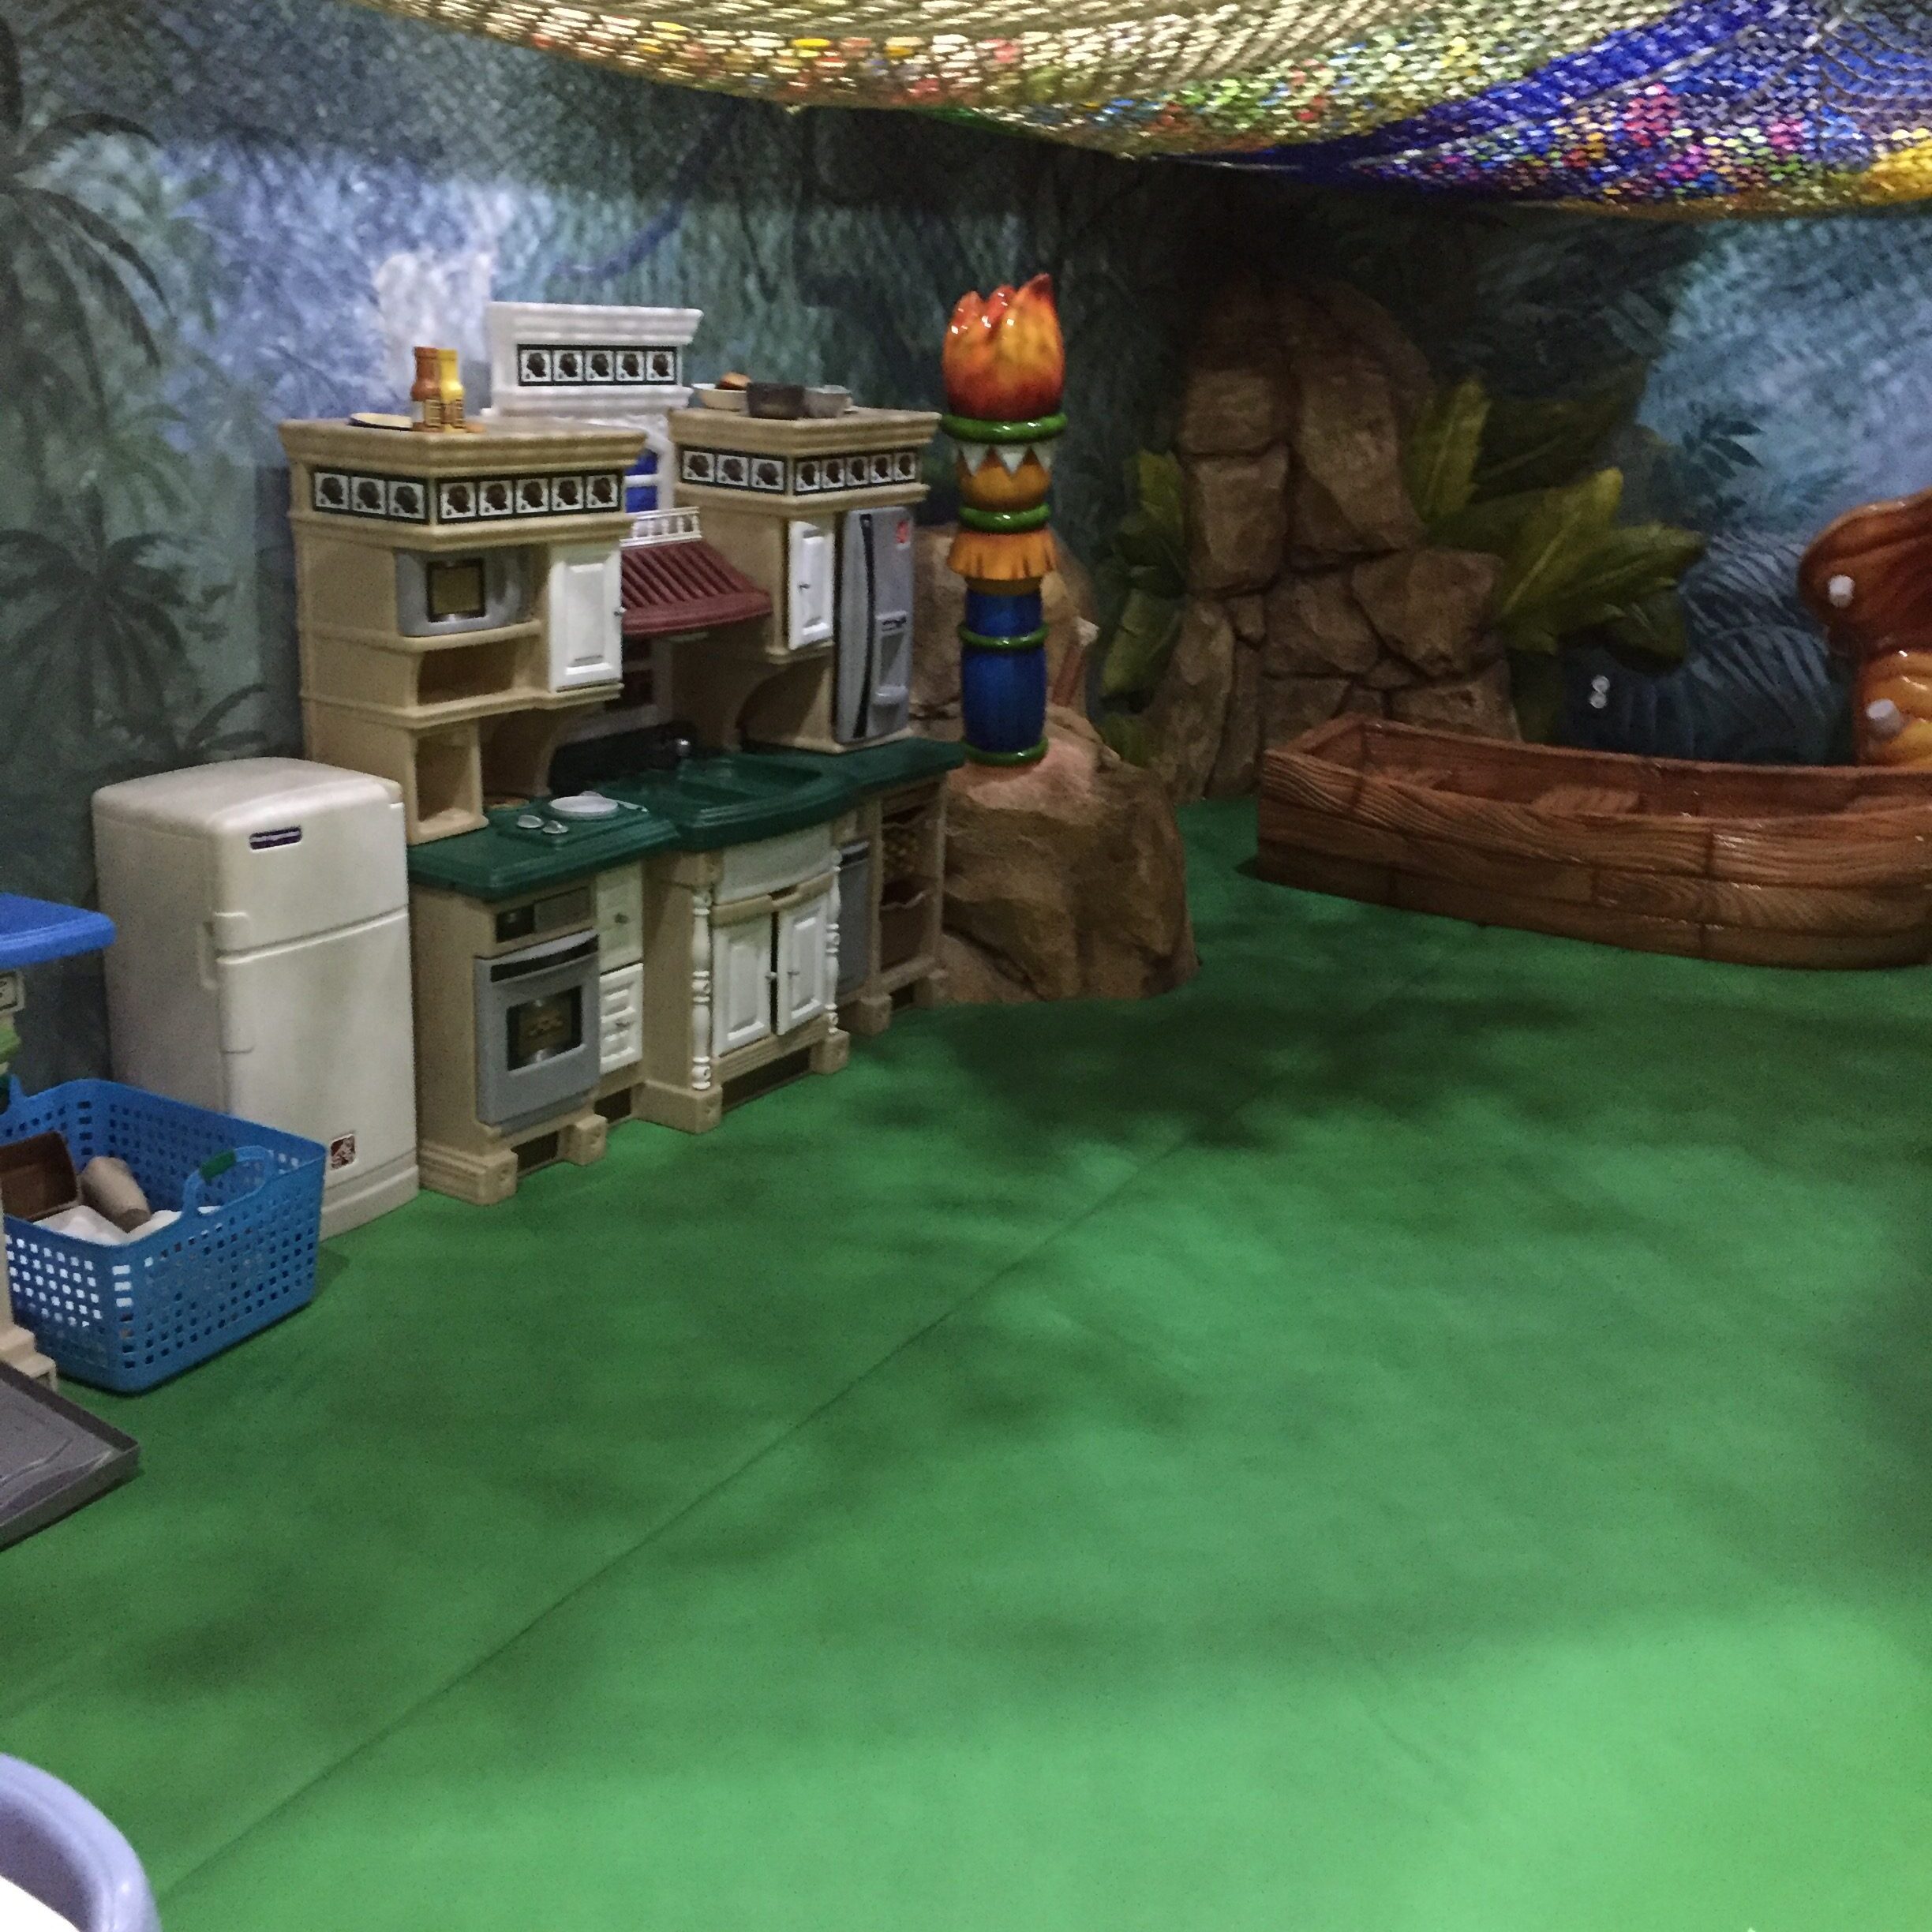 Kitchen play area at Jungle Kids Cafe